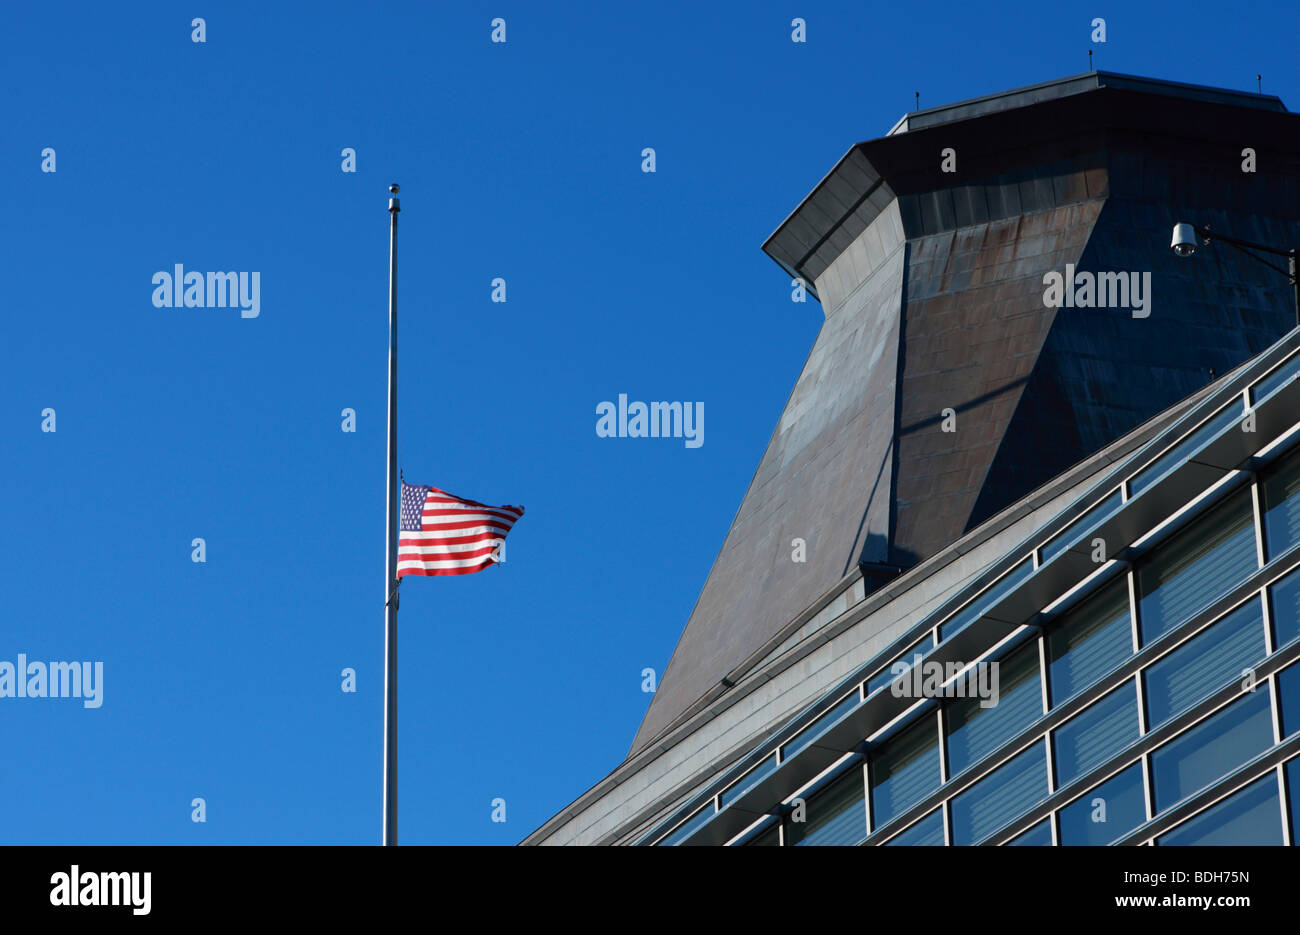 The flag was flown at half-mast on the United States Embassy building in Ottawa upon the death of Ted Kennedy. Stock Photo